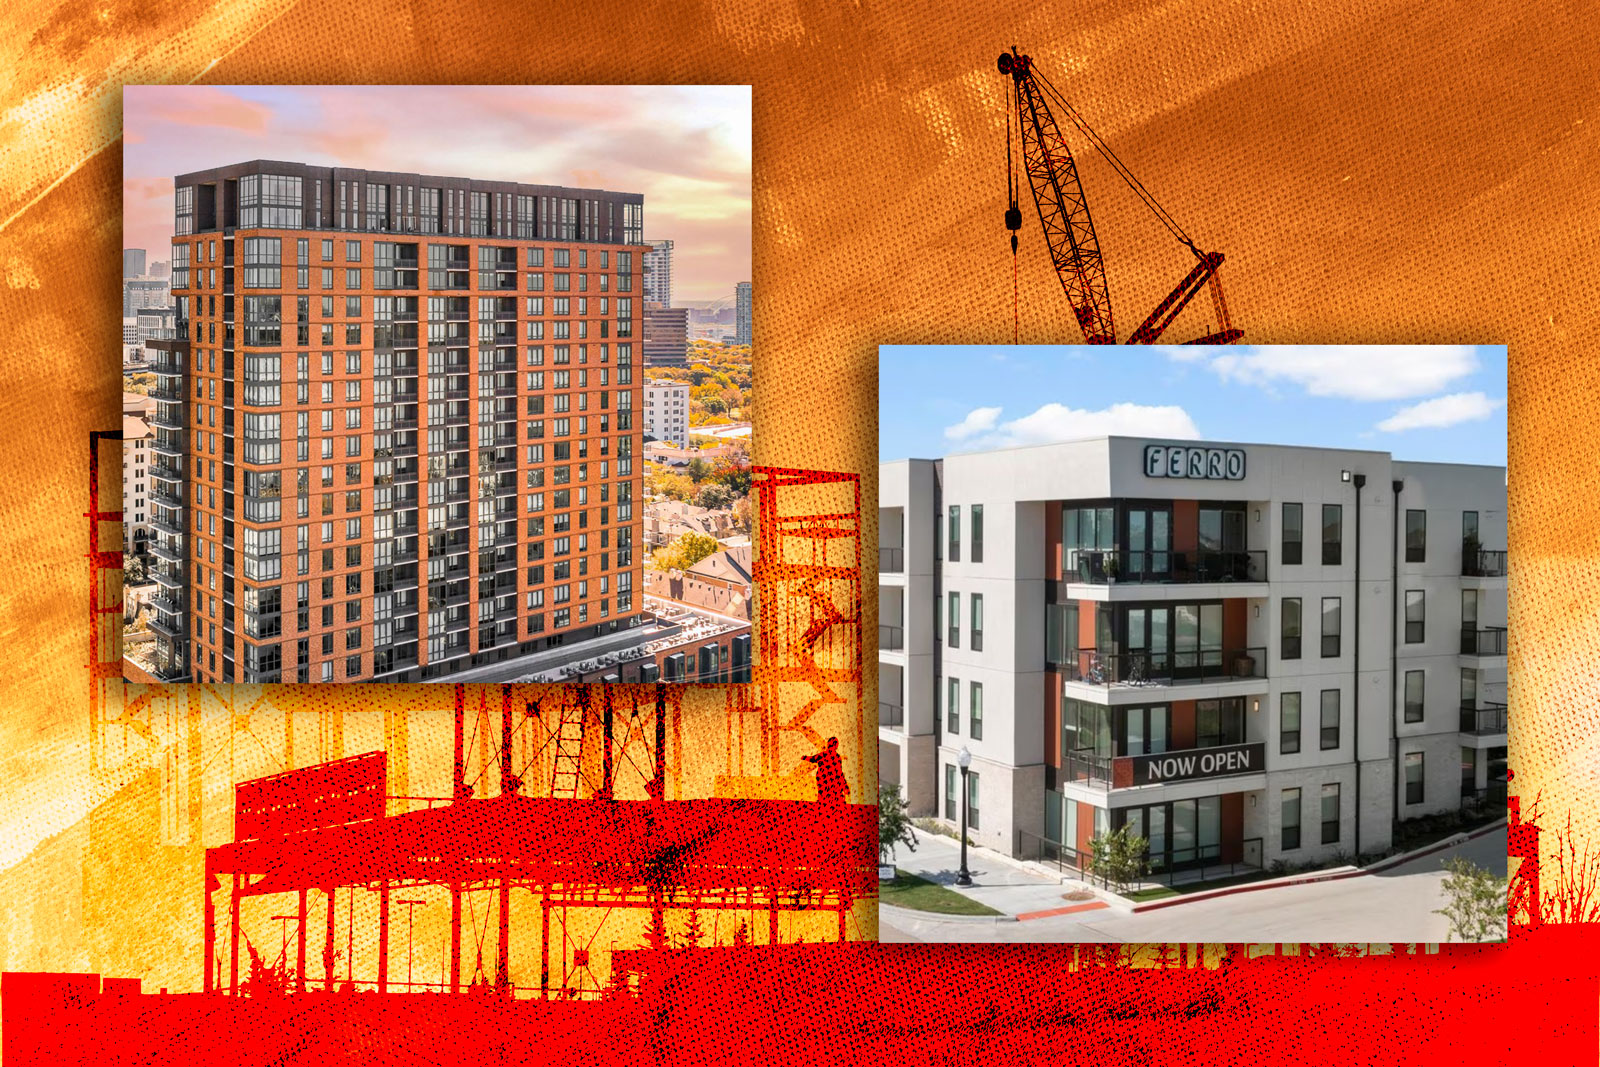 New apartments proliferate in DFW